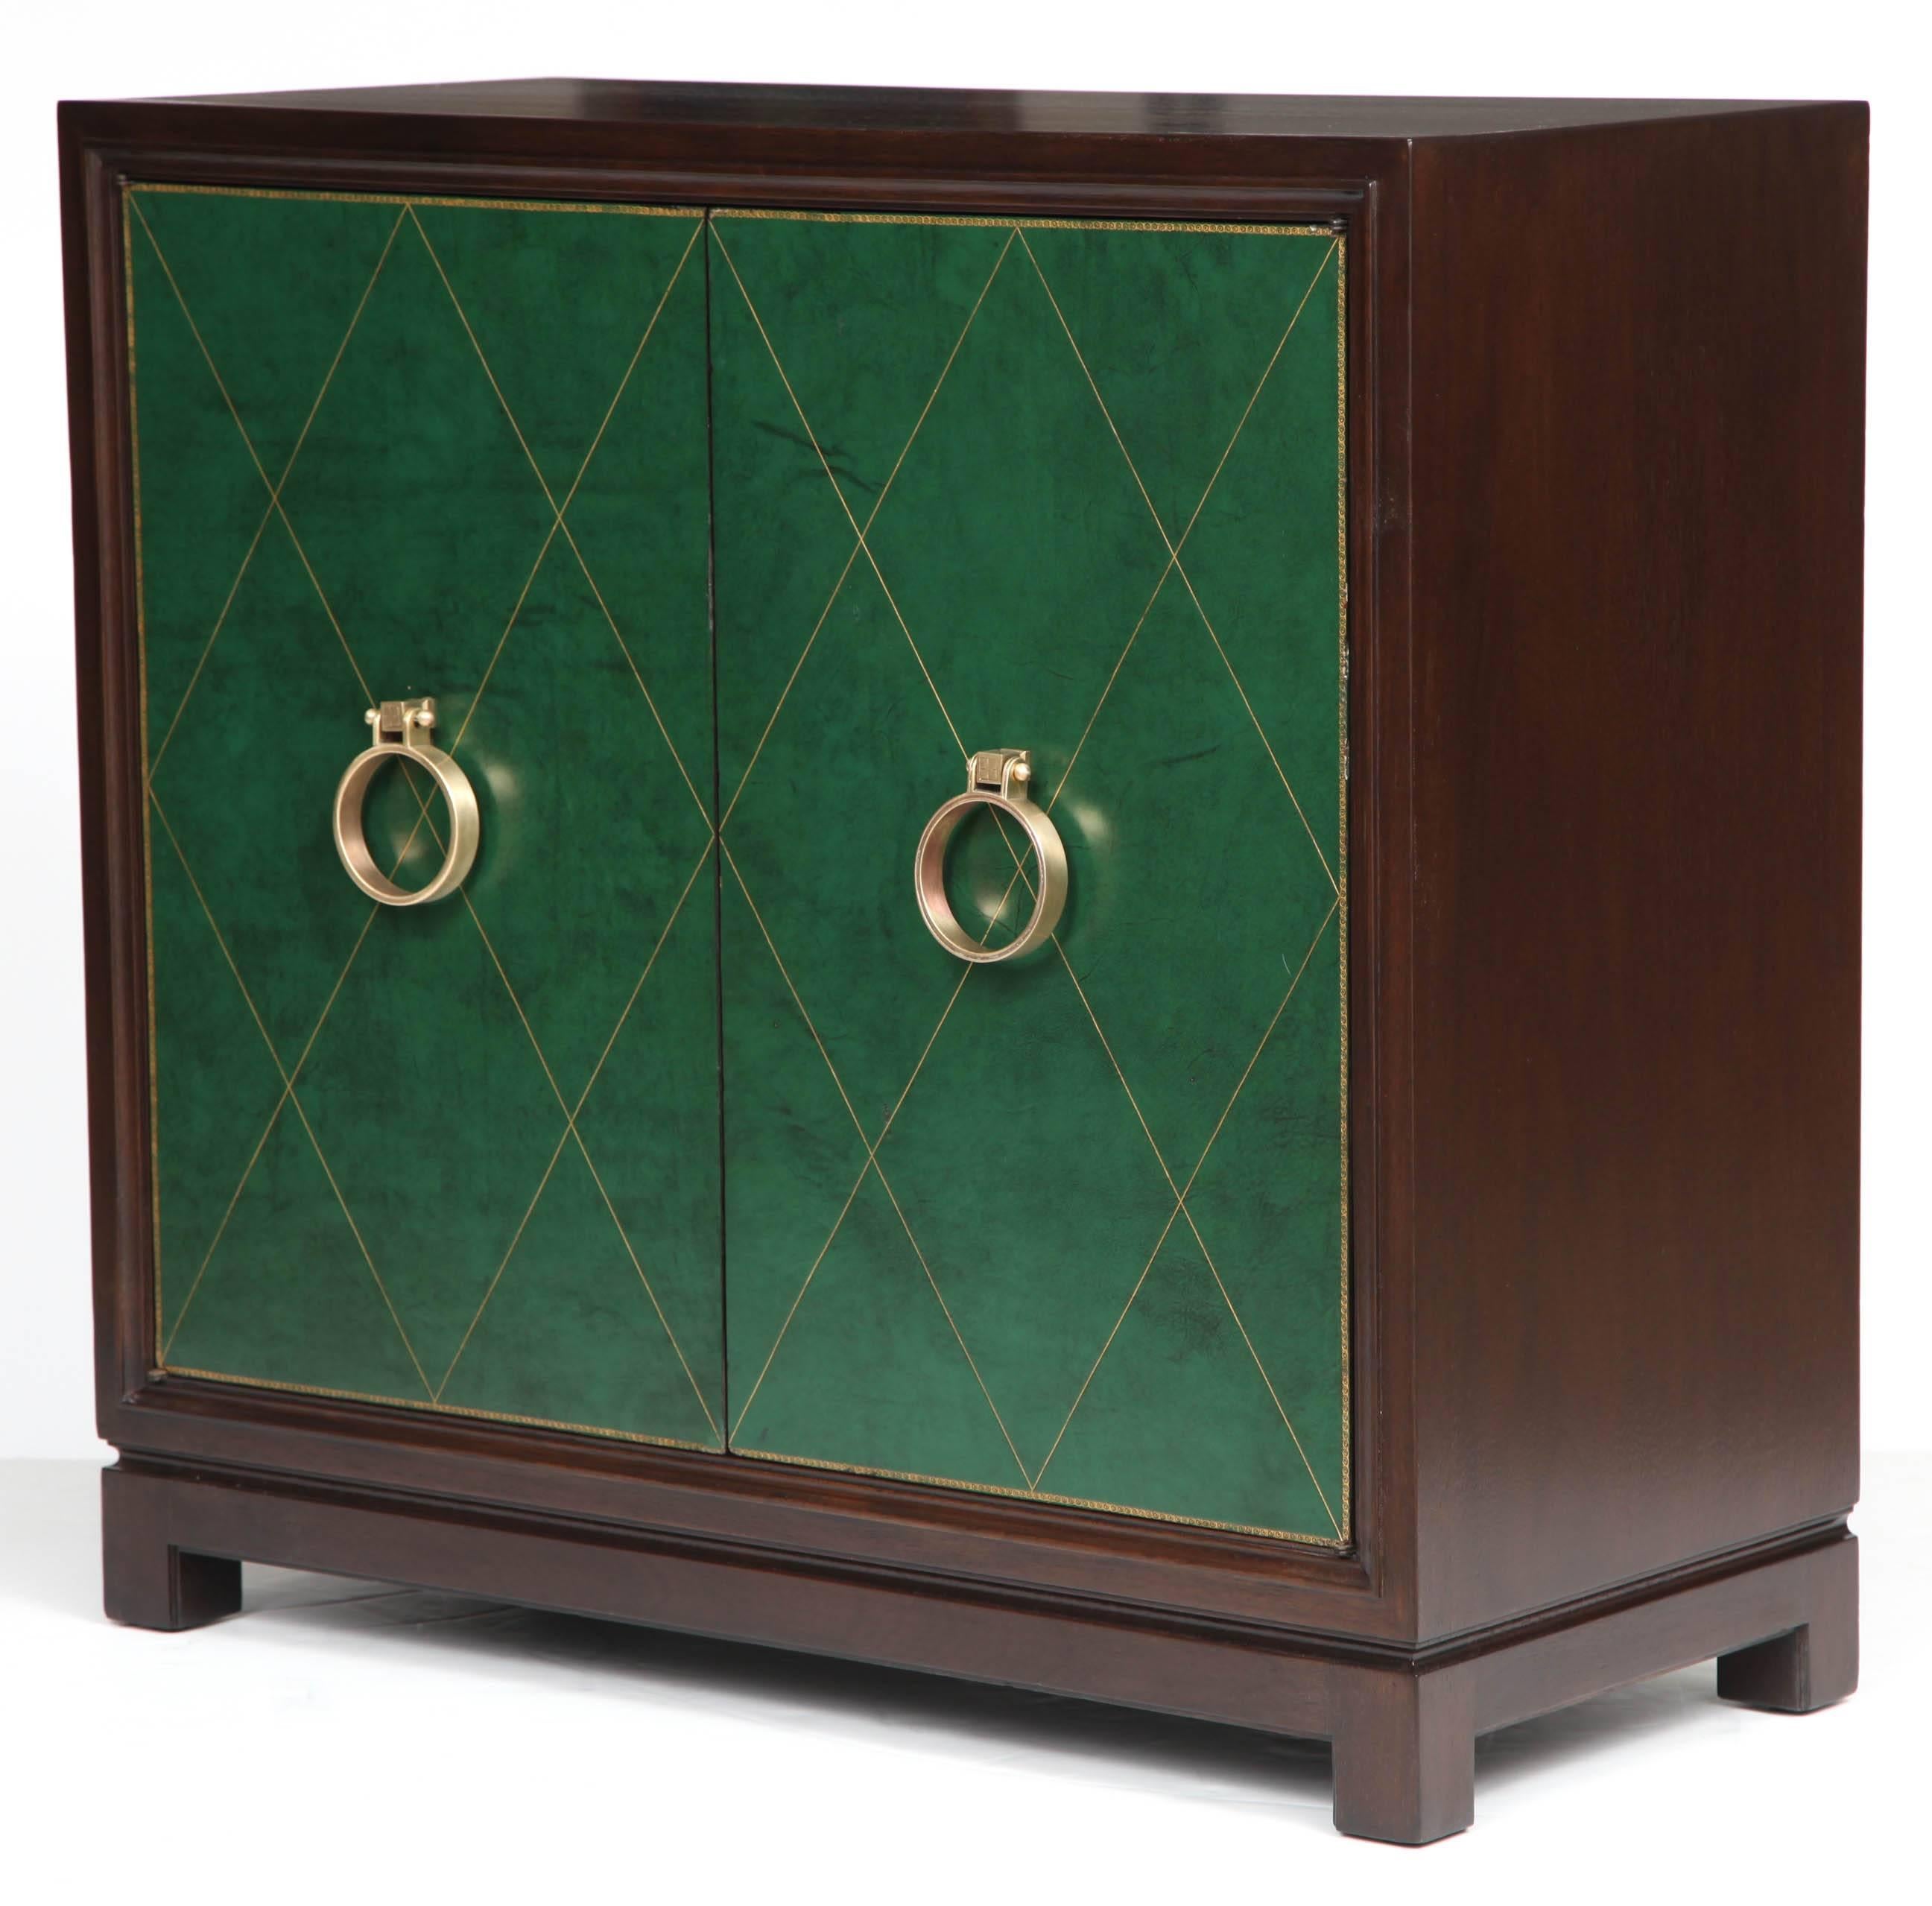 Classic Midcentury Walnut cabinet with tooled diamond patterned green leather door panels and satin brass door knocker pulls. Cabinet features two adjustable interior shelves. Perfectly sized for an entry way console, buffet cabinet or dry bar.